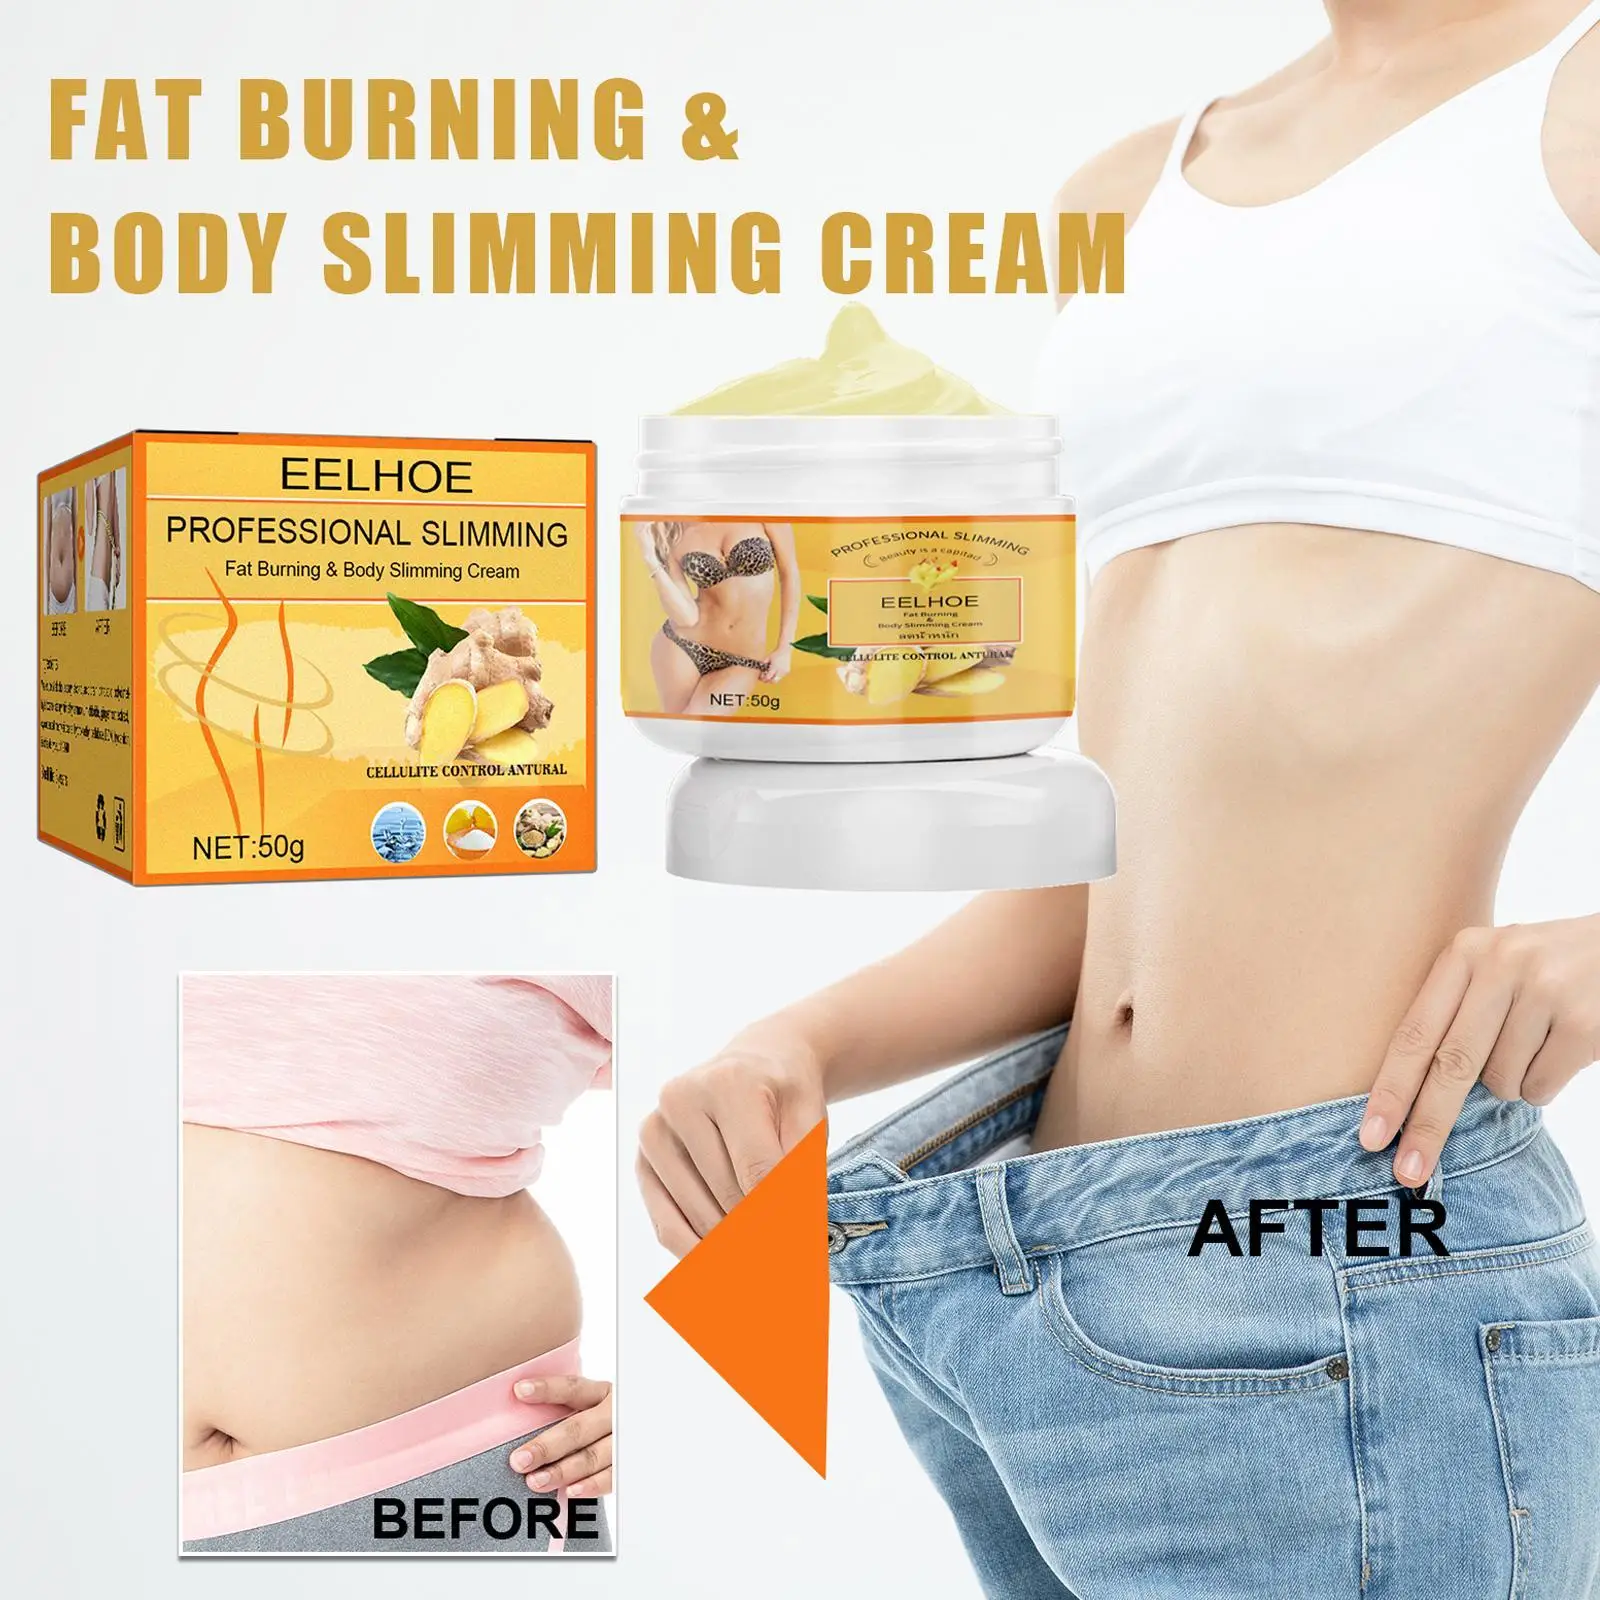 Ginger Fat Burning Cream Fat Loss Slimming Slimming Body Sculpting Fat Reduction Cream Massage Cream Lose Weight Product